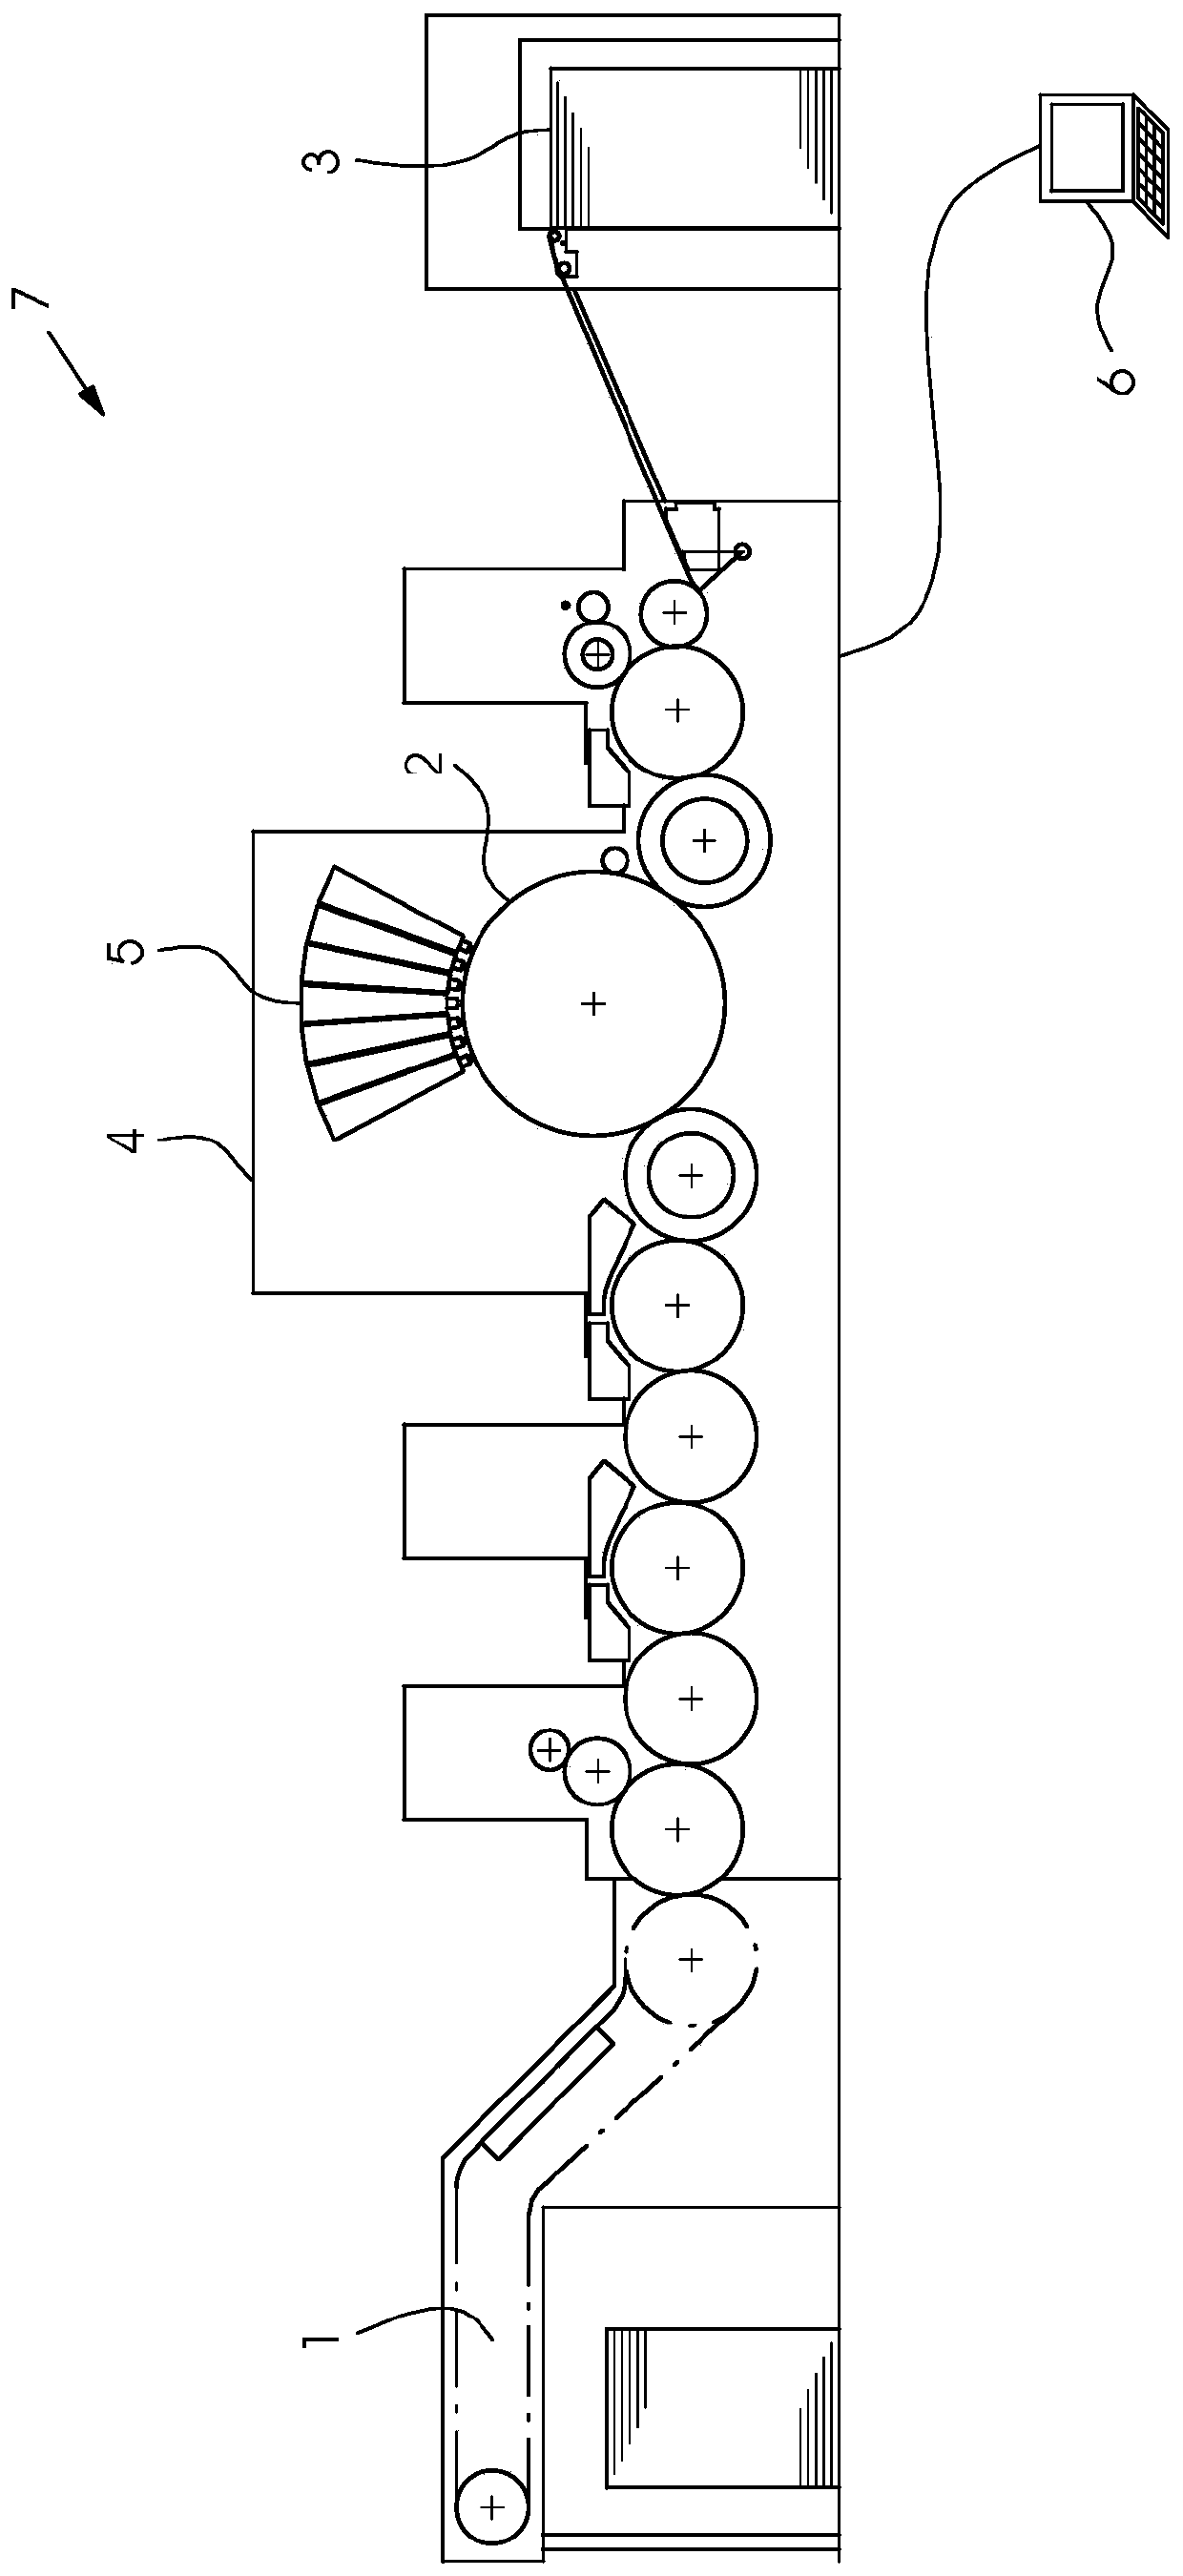 Printing nozzle compensation method considering adjacent surface coverage